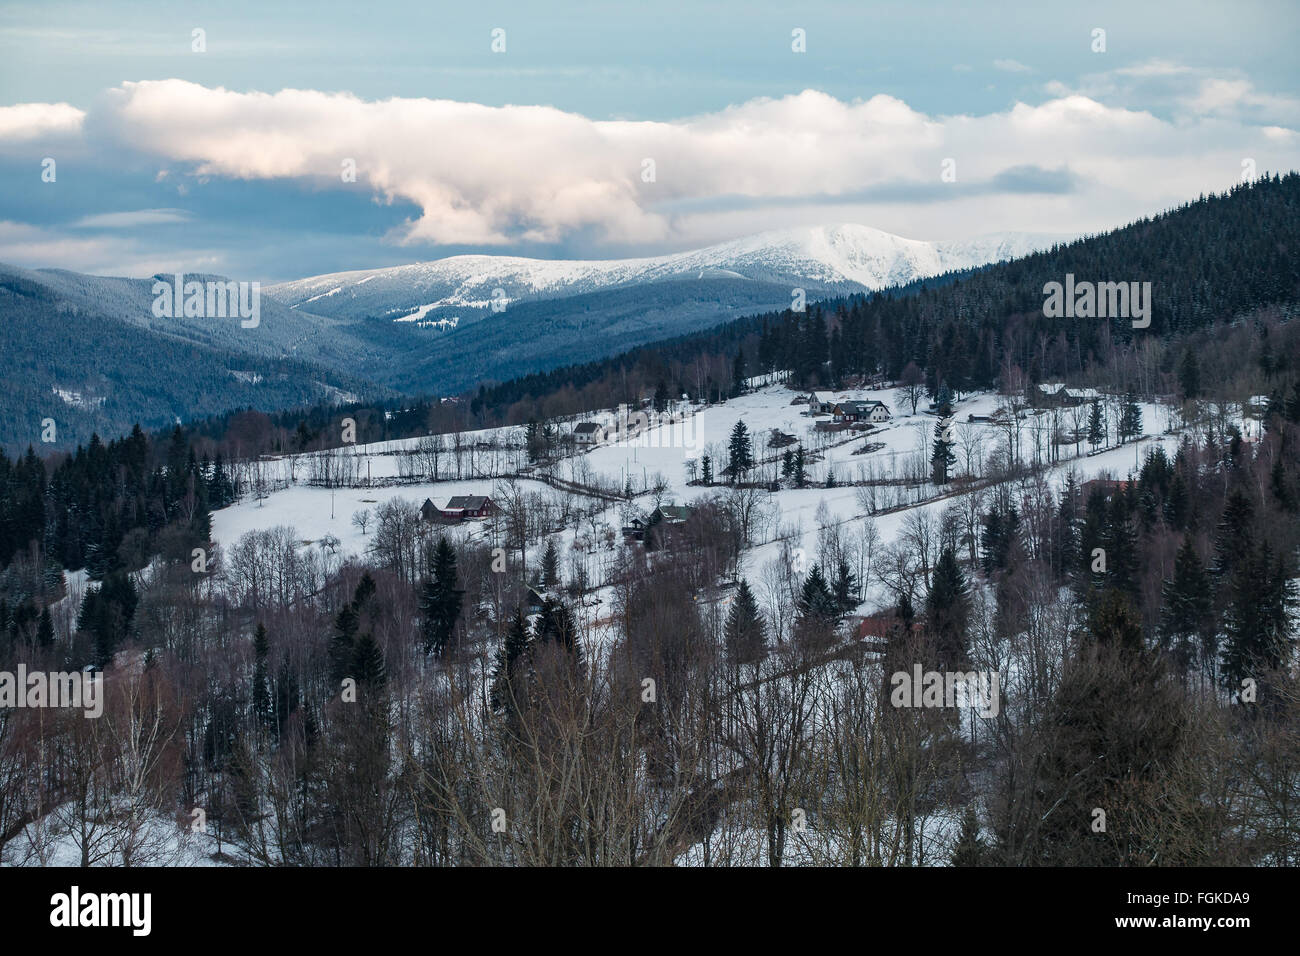 Winter in the mountains with snow Stock Photo